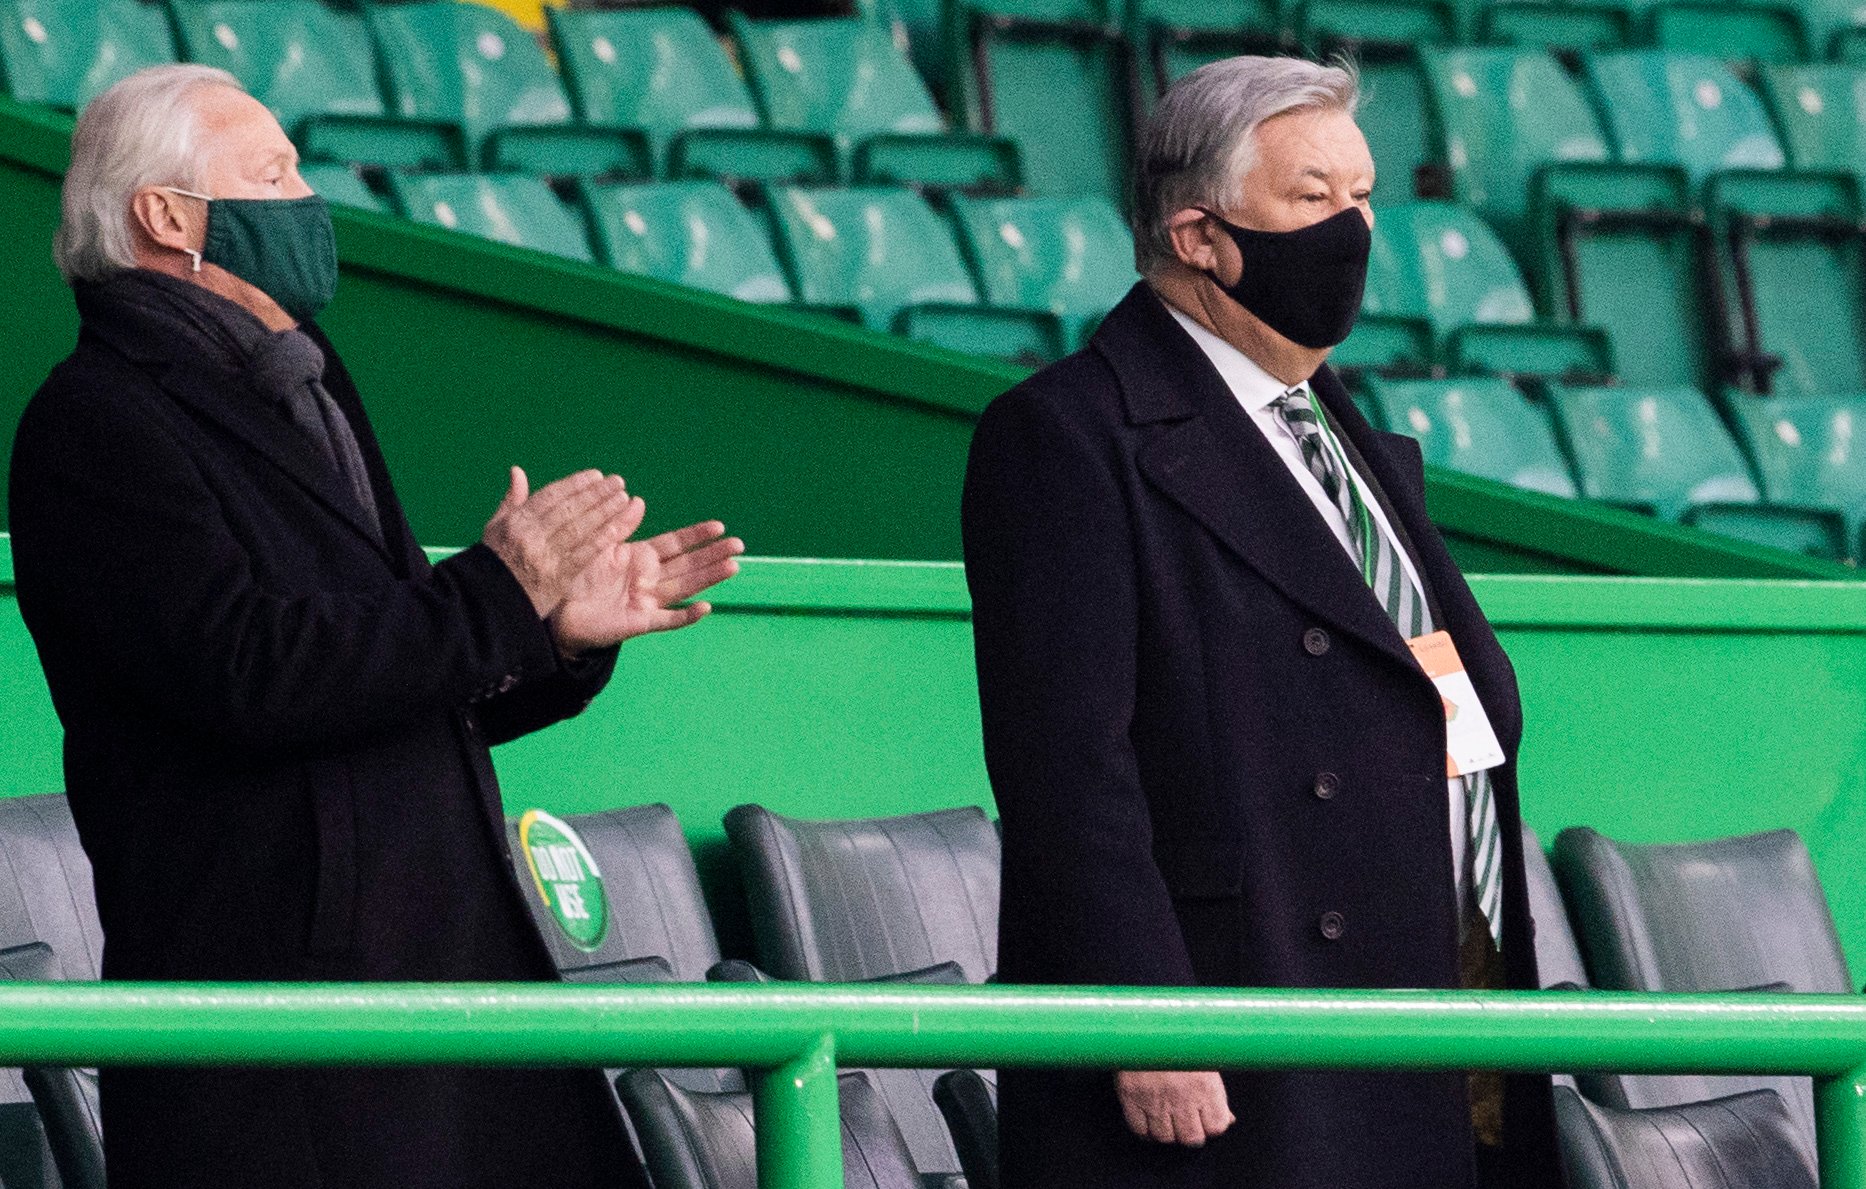 Celtic AGM: The most urgent questions that need to be answered by Peter Lawwell and company